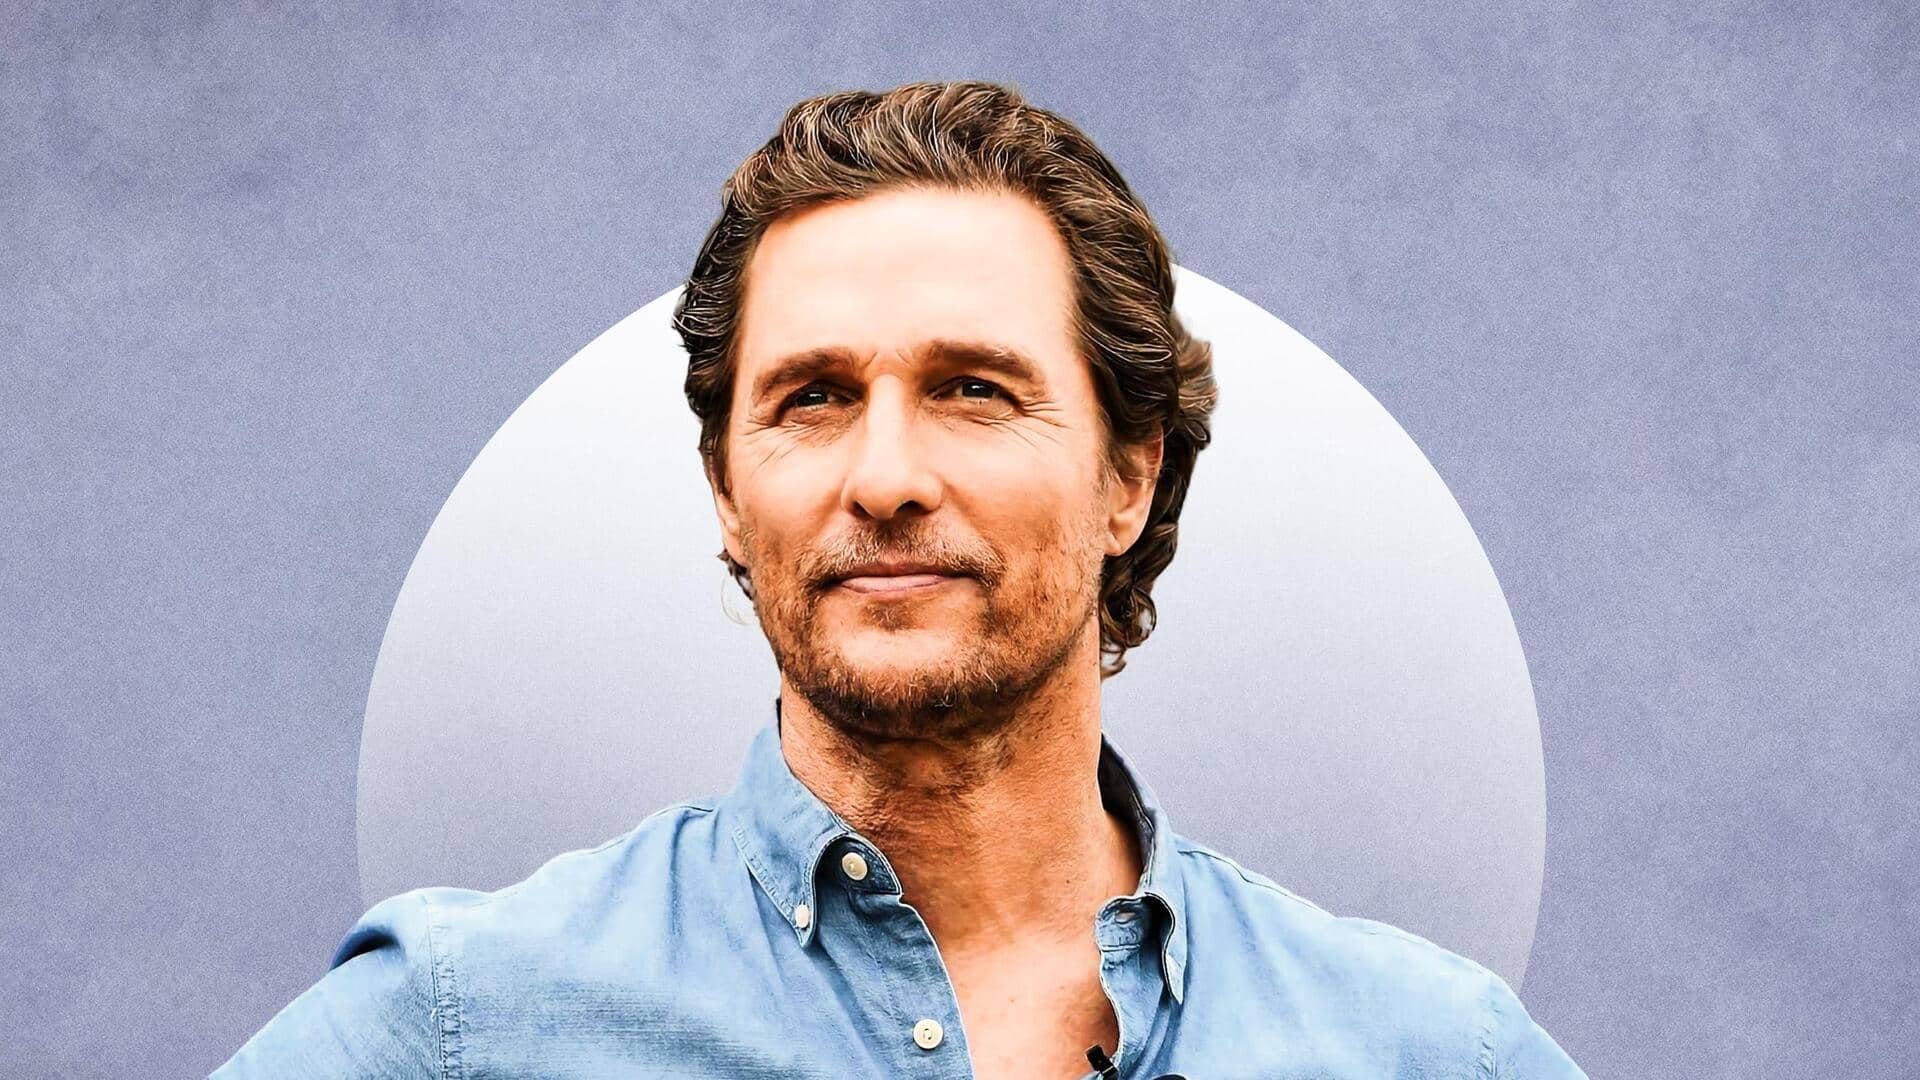 'Dazed and Confused' to 'Interstellar': Matthew McConaughey's best performances